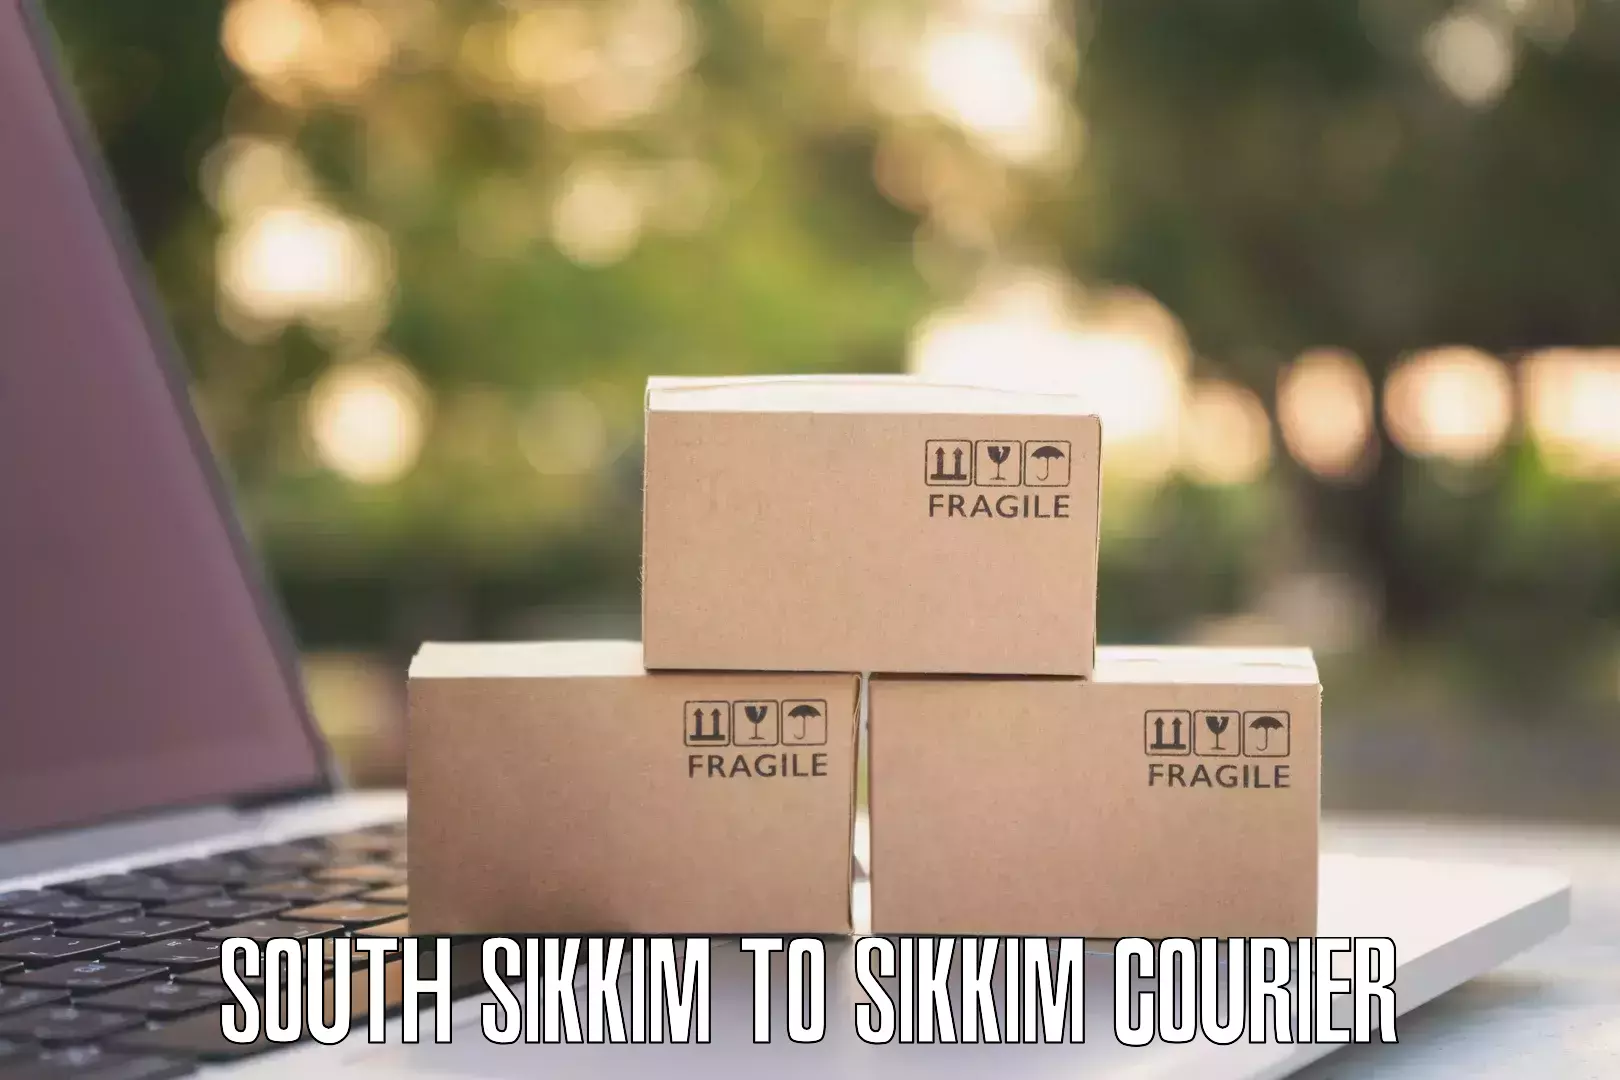 24/7 courier service South Sikkim to South Sikkim